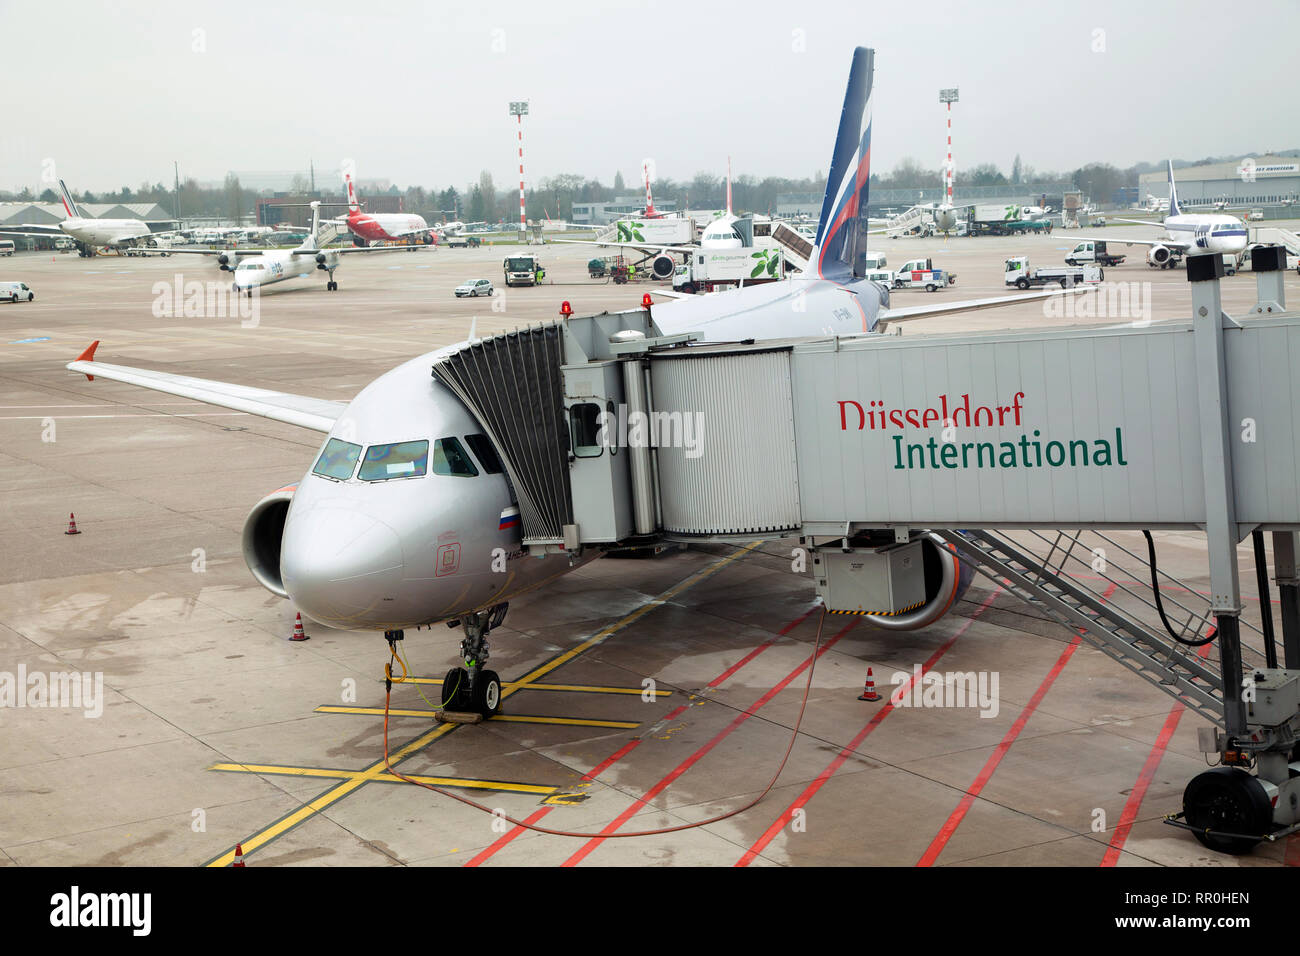 Aircraft Airbus A319 of Aeroflot airline boarding at the airport in Dusseldorf city, Germany Stock Photo